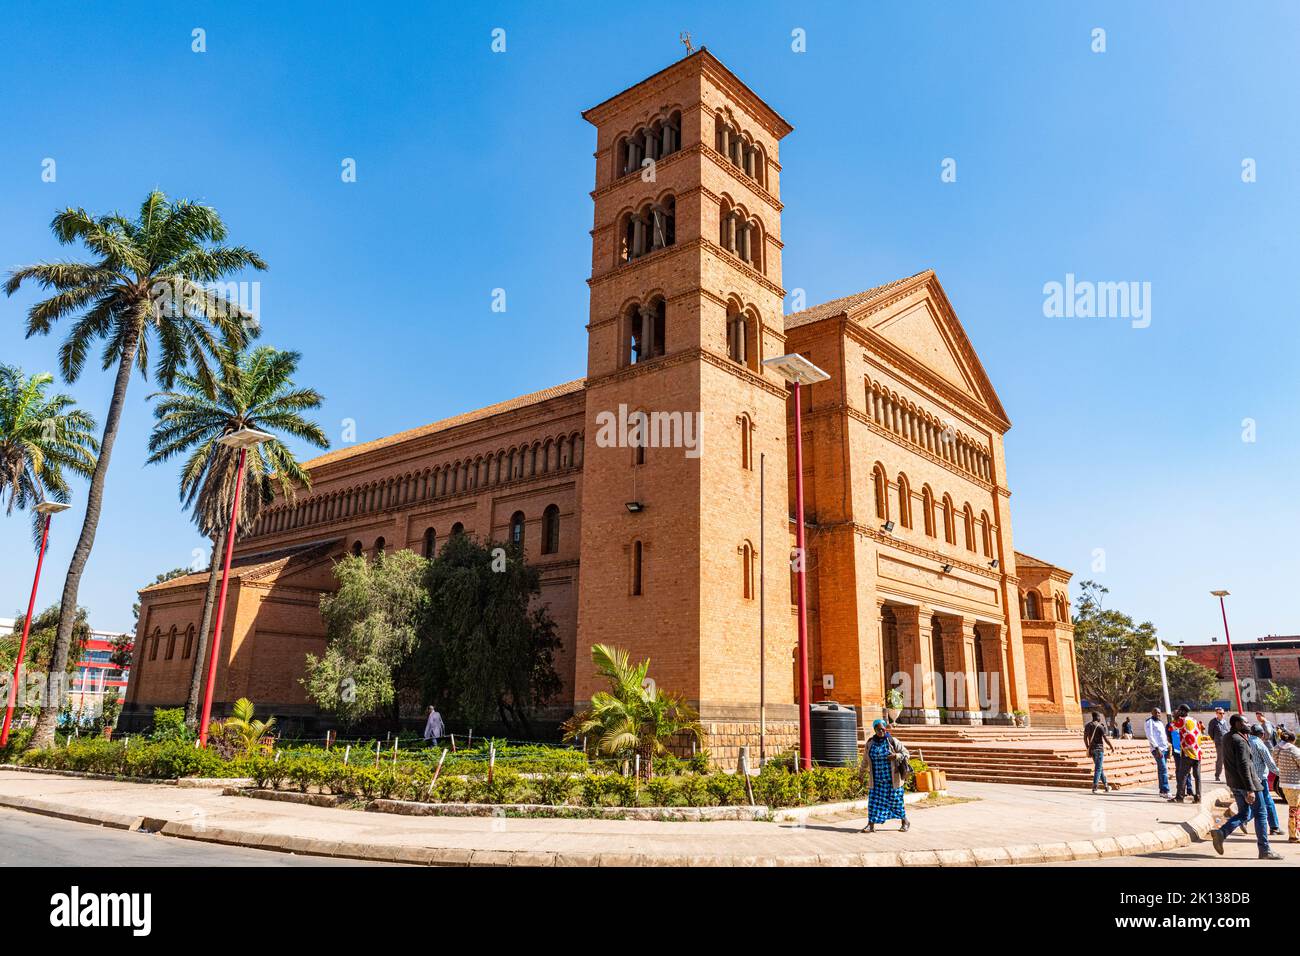 Sts. Peter and Paul Cathedral of Lubumbashi, Democratic Republic of the Congo, Africa Stock Photo